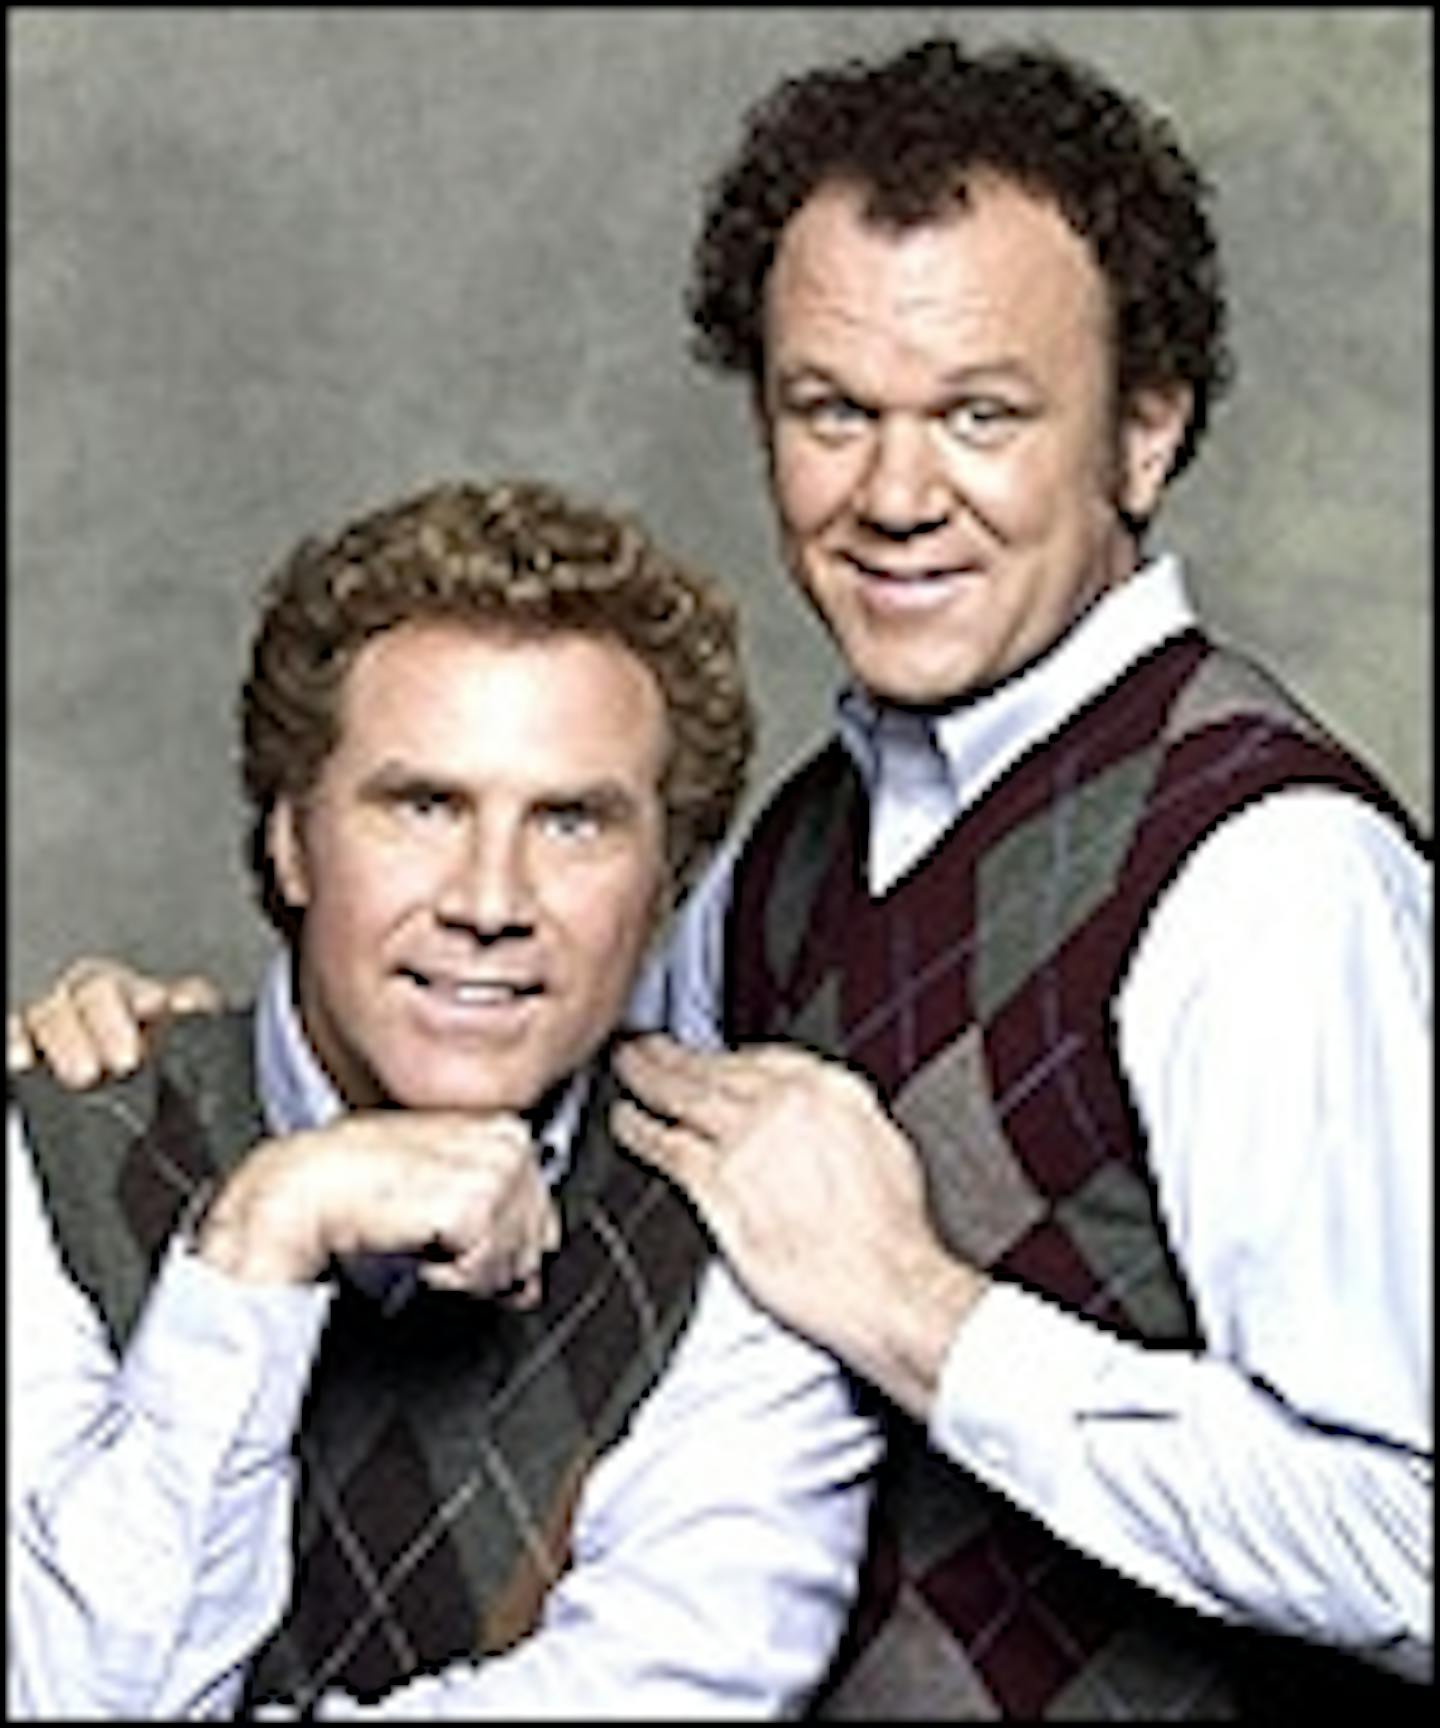 Step Brothers Trailer Online, Movies